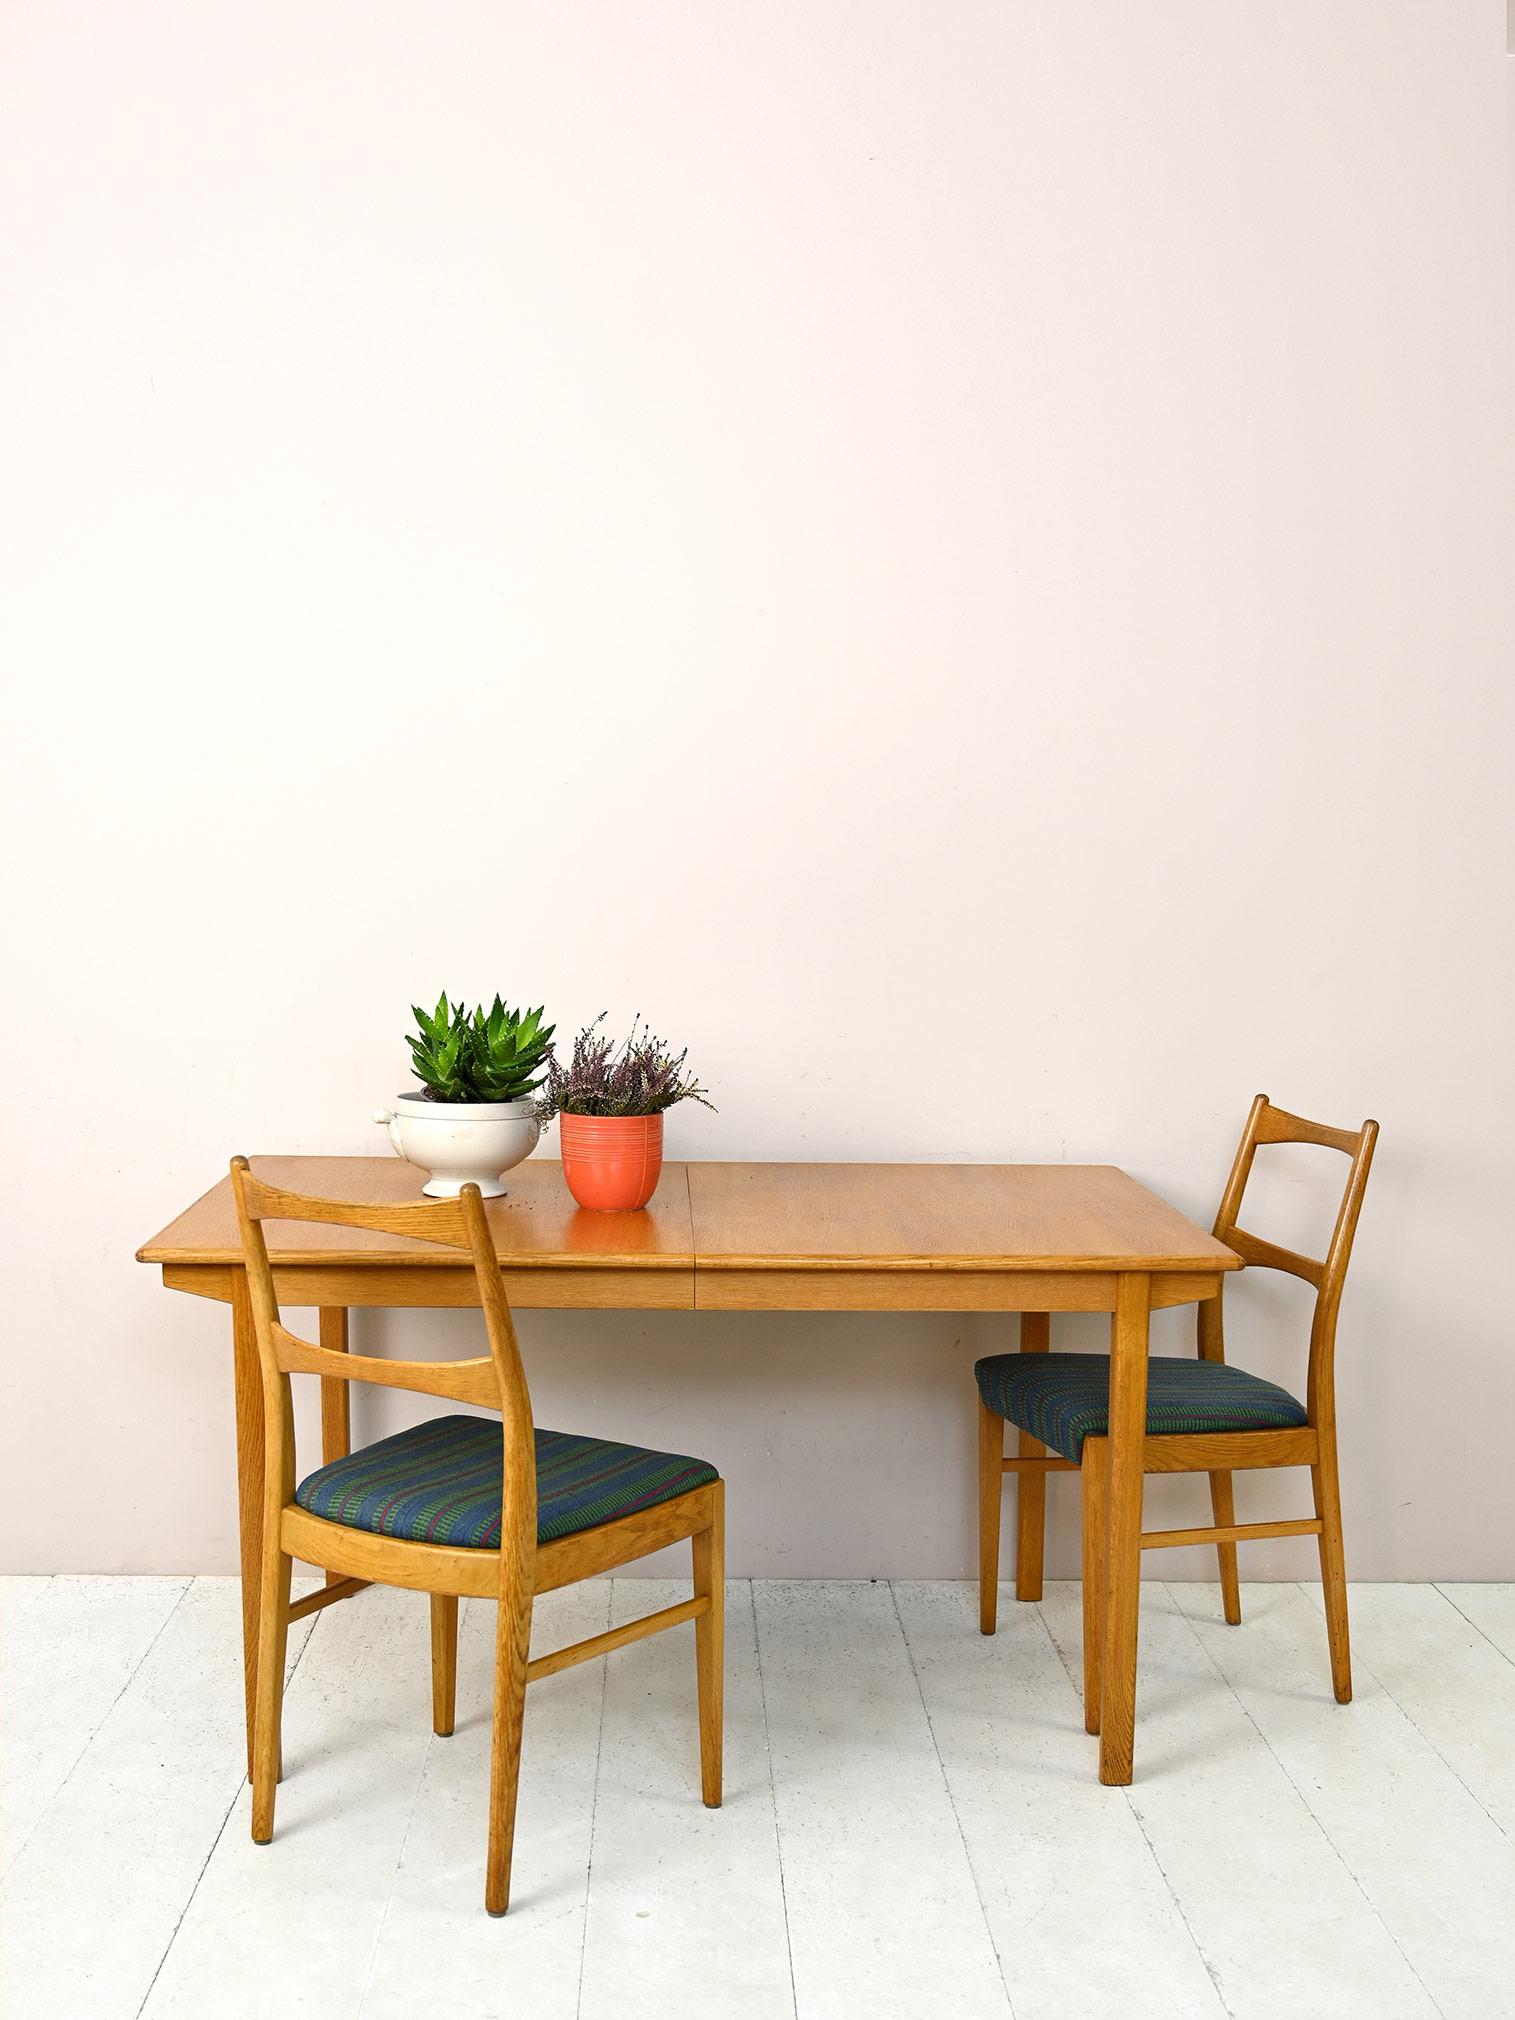 Scandinavian modern antique dining table.

This vintage piece of furniture fits into environments with a young, contemporary style thanks to its modern lines and light color of oak wood.
The presence of an additional central board allows you to